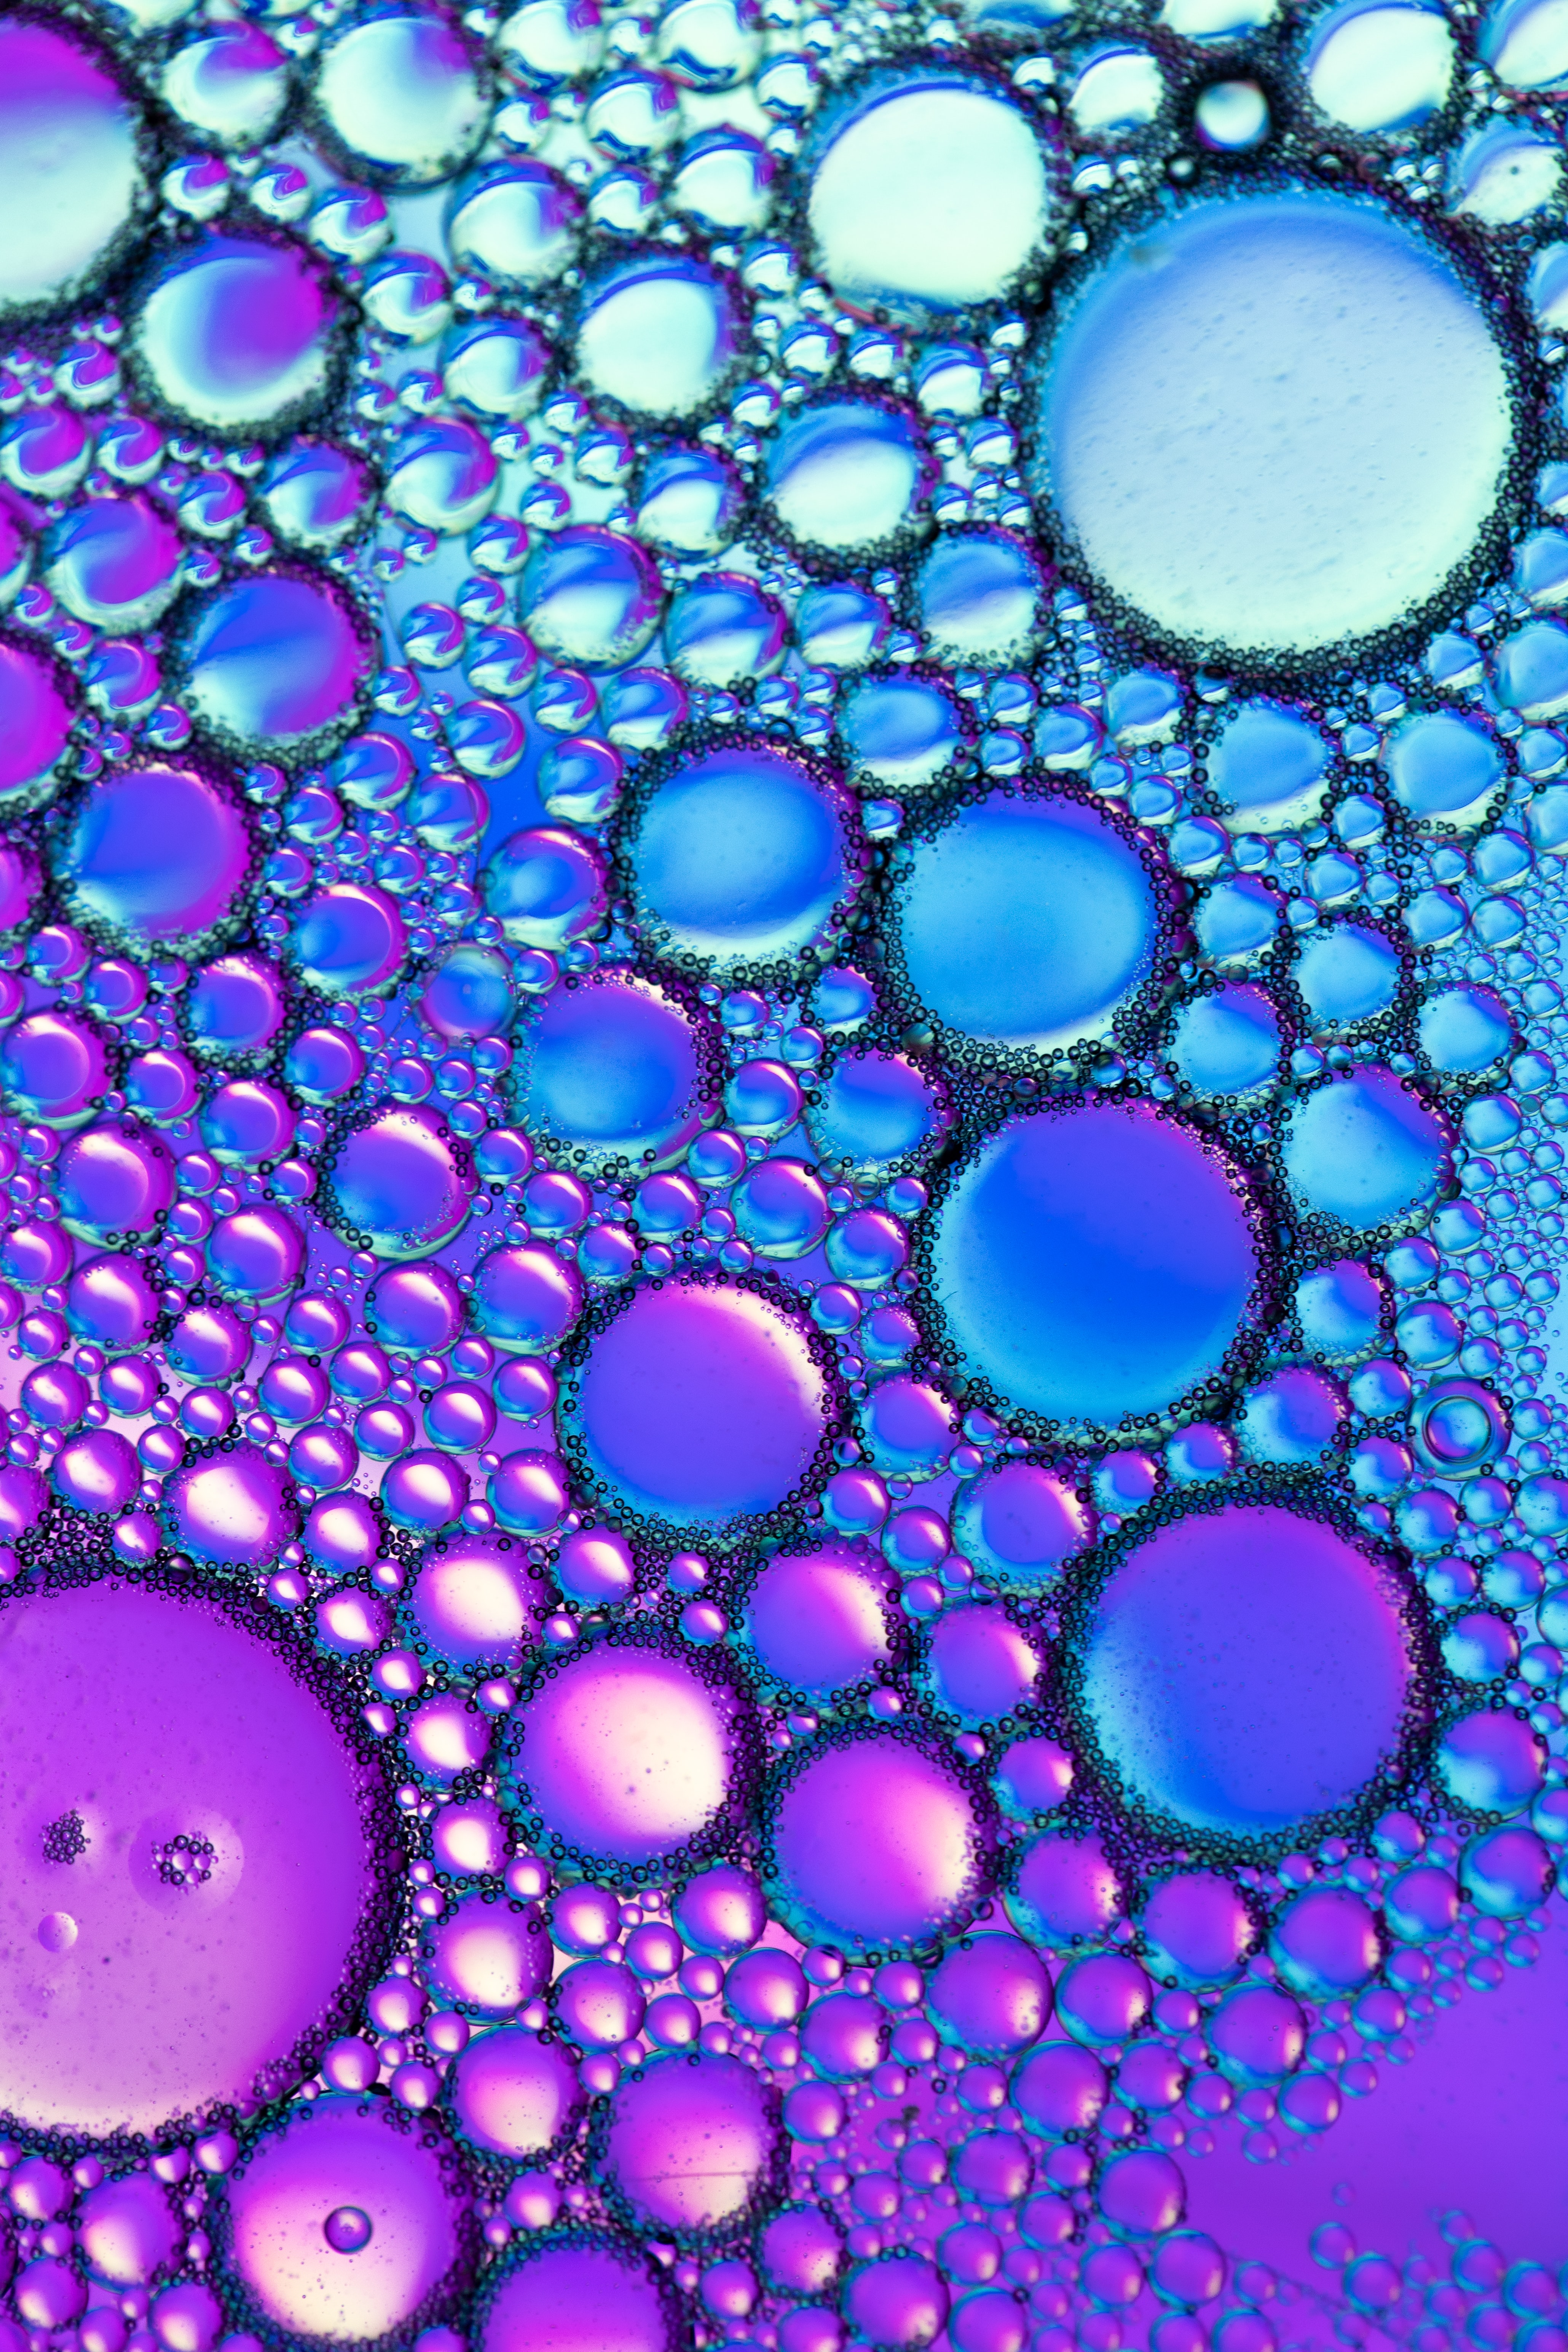 69364 download wallpaper bubbles, violet, blue, macro, liquid, purple, butter, oil screensavers and pictures for free